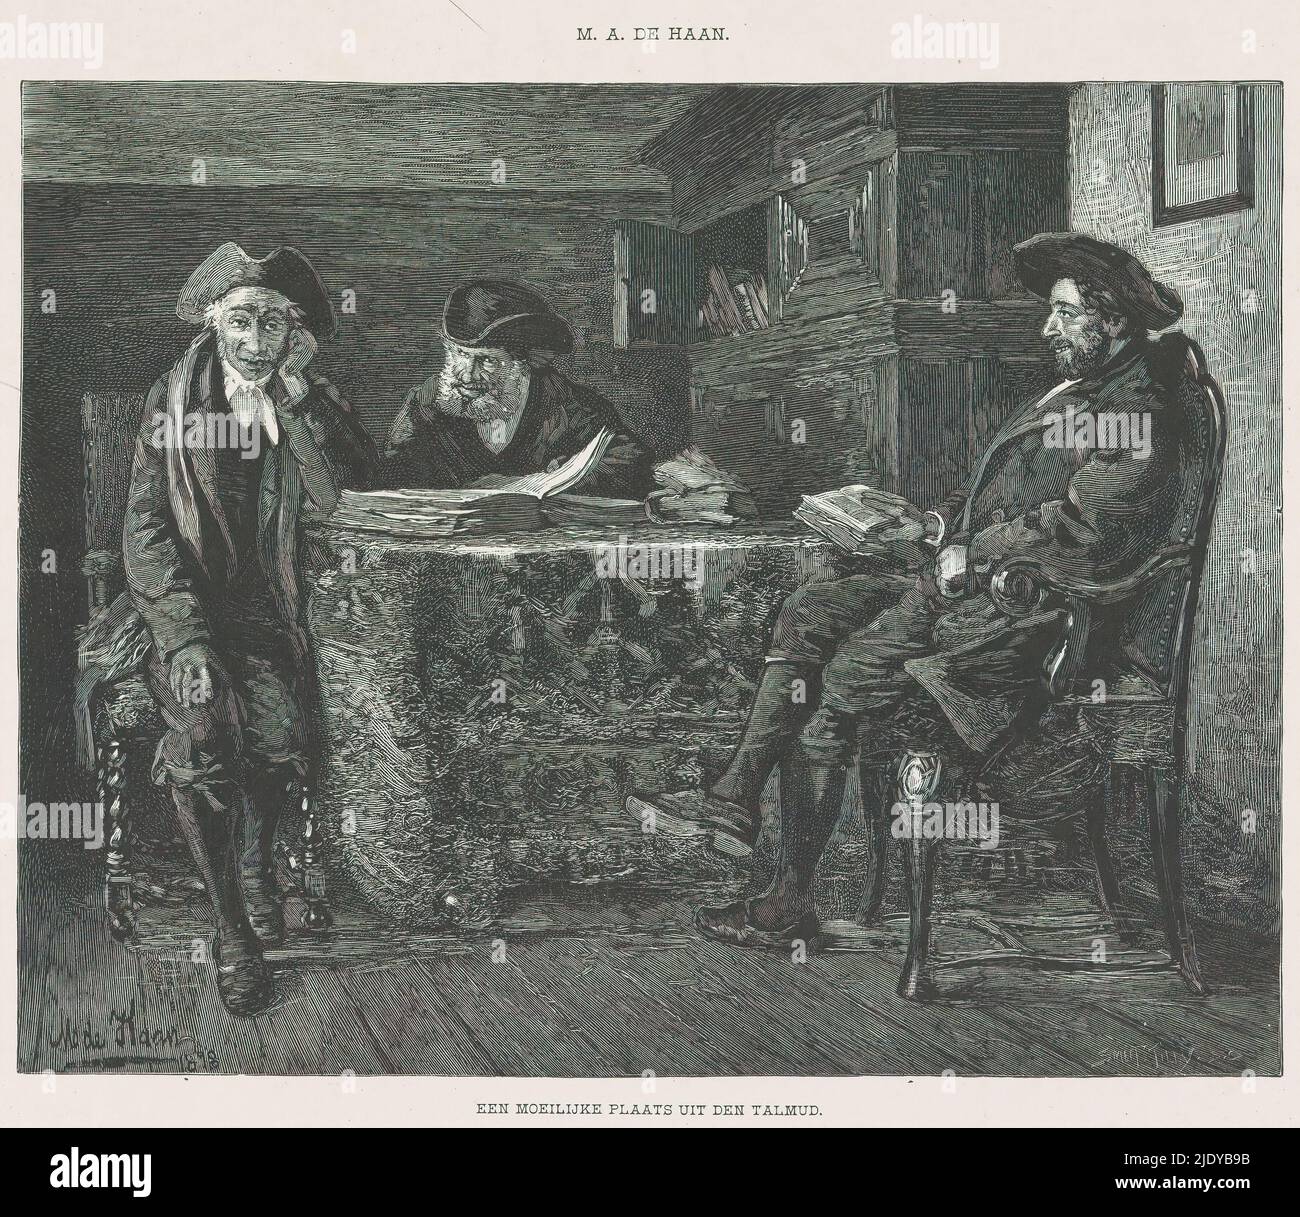 Three Jewish men reading around a table, A difficult place from the talmud (title on object), Three men in hats are seated around a table with a number of books on it. In the background, a closet door is open., print maker: Smeeton-Tilly, (mentioned on object), after design by: Meijer Isaäc de Haan, (mentioned on object), Paris, 1878, paper, height 334 mm × width 502 mm Stock Photo